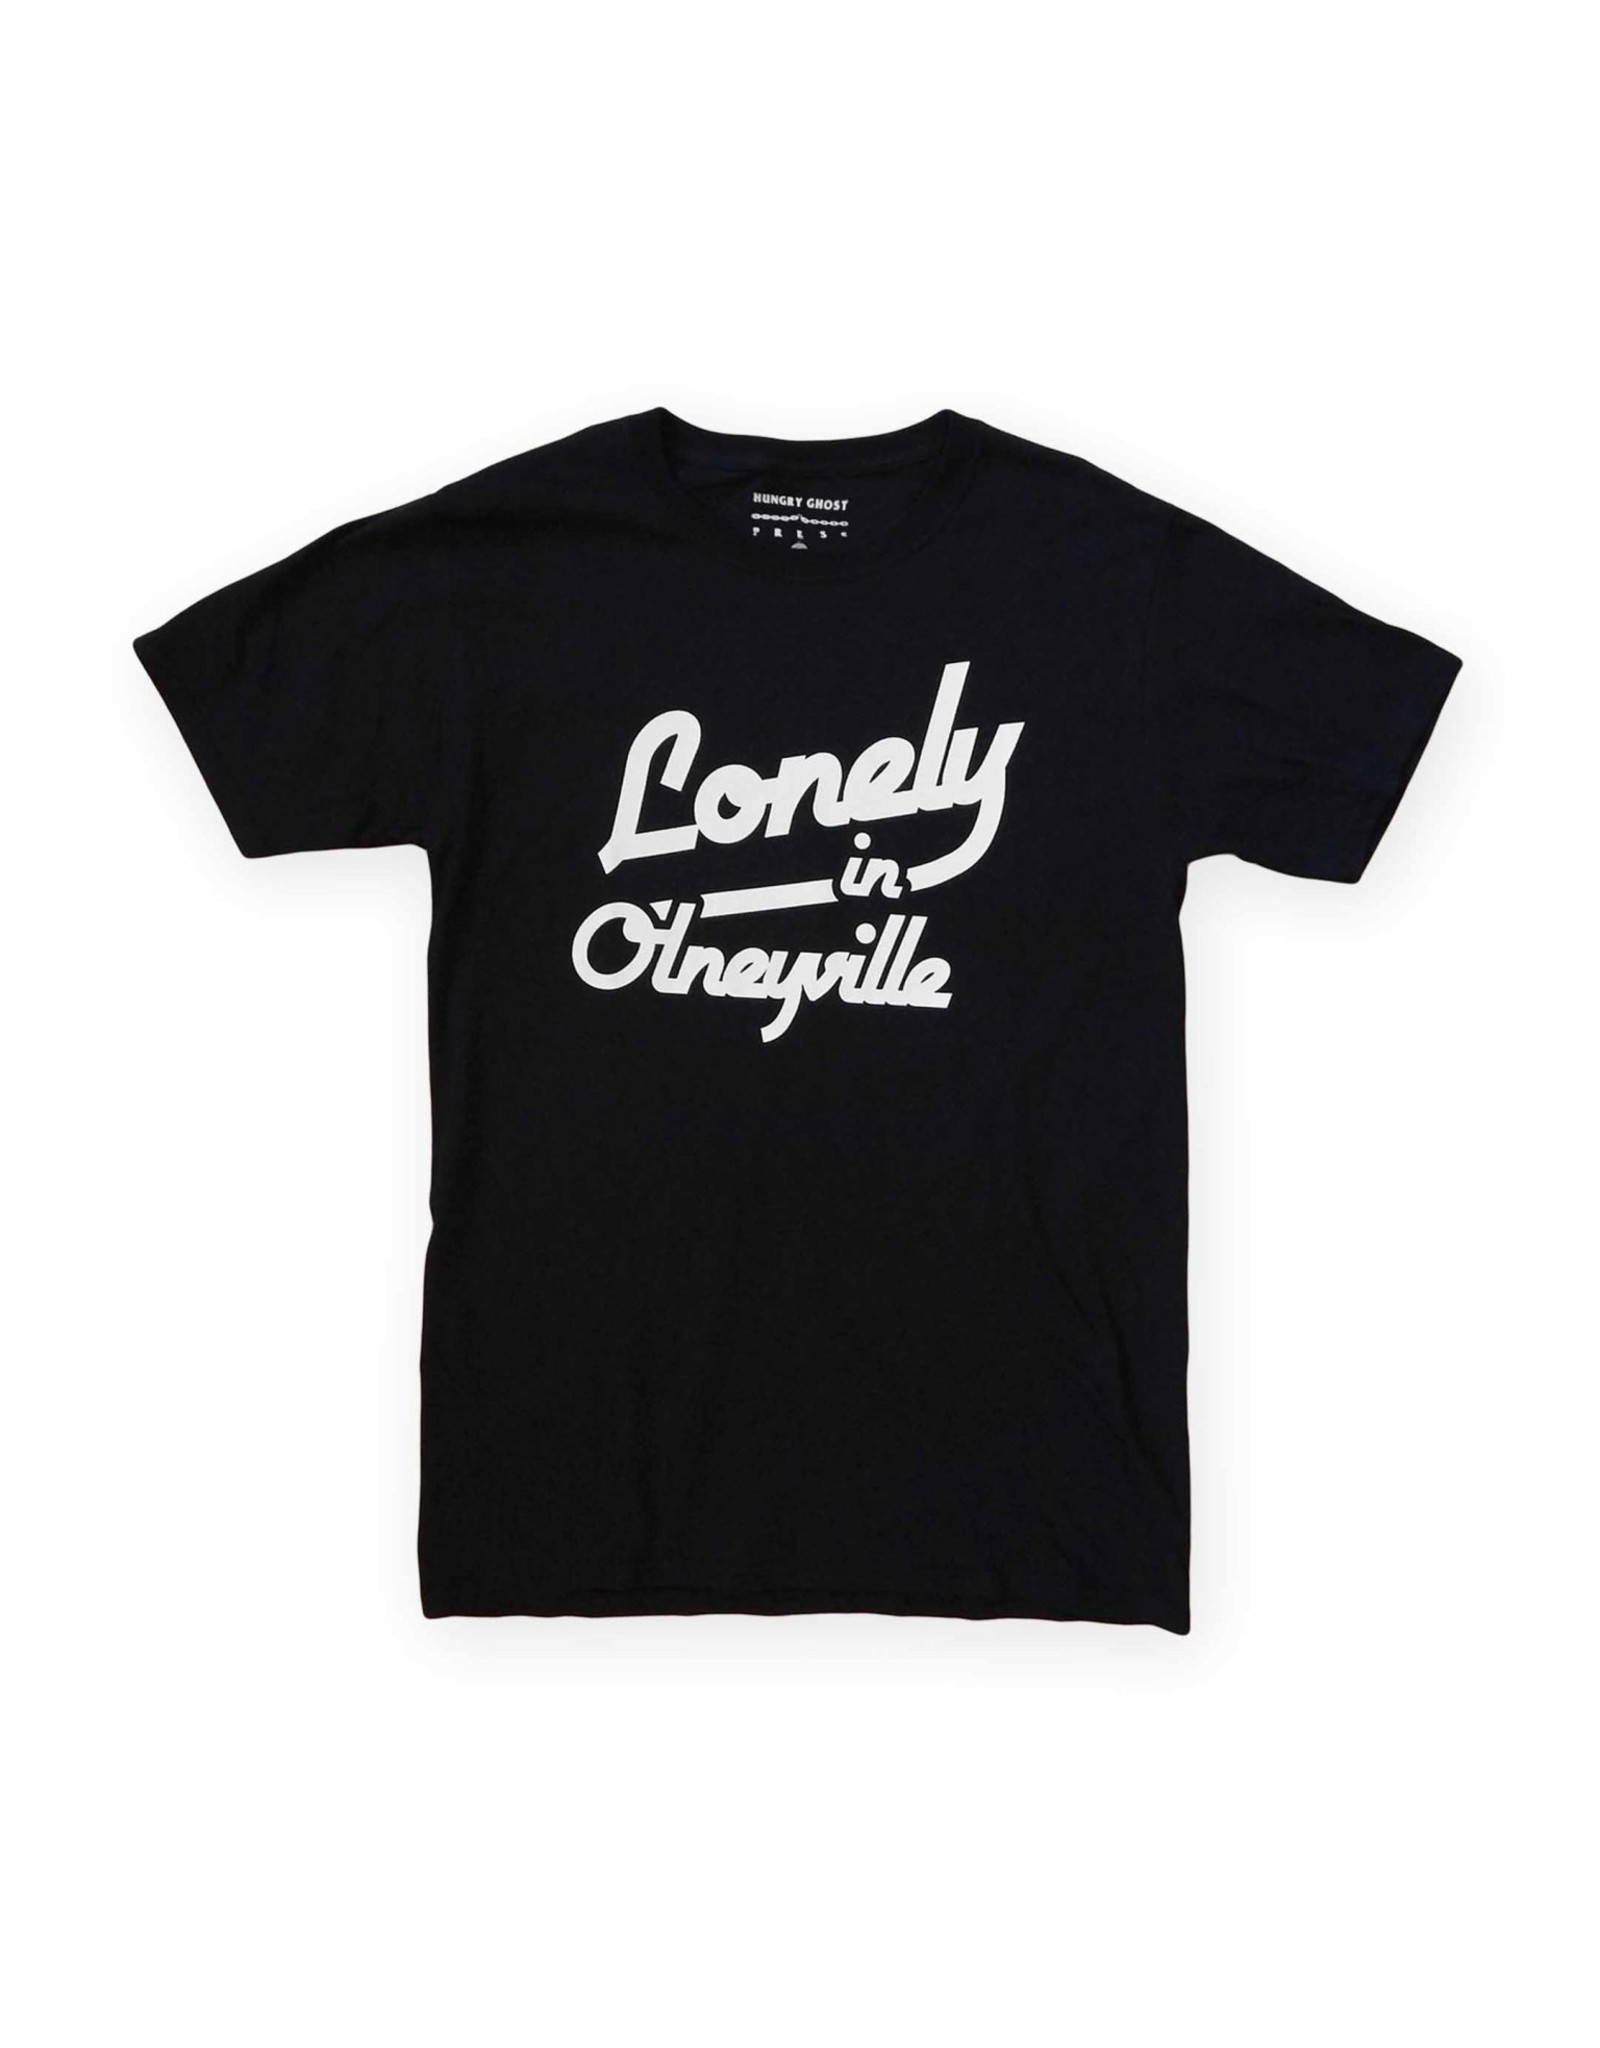 Lonely in Olneyville Shirt